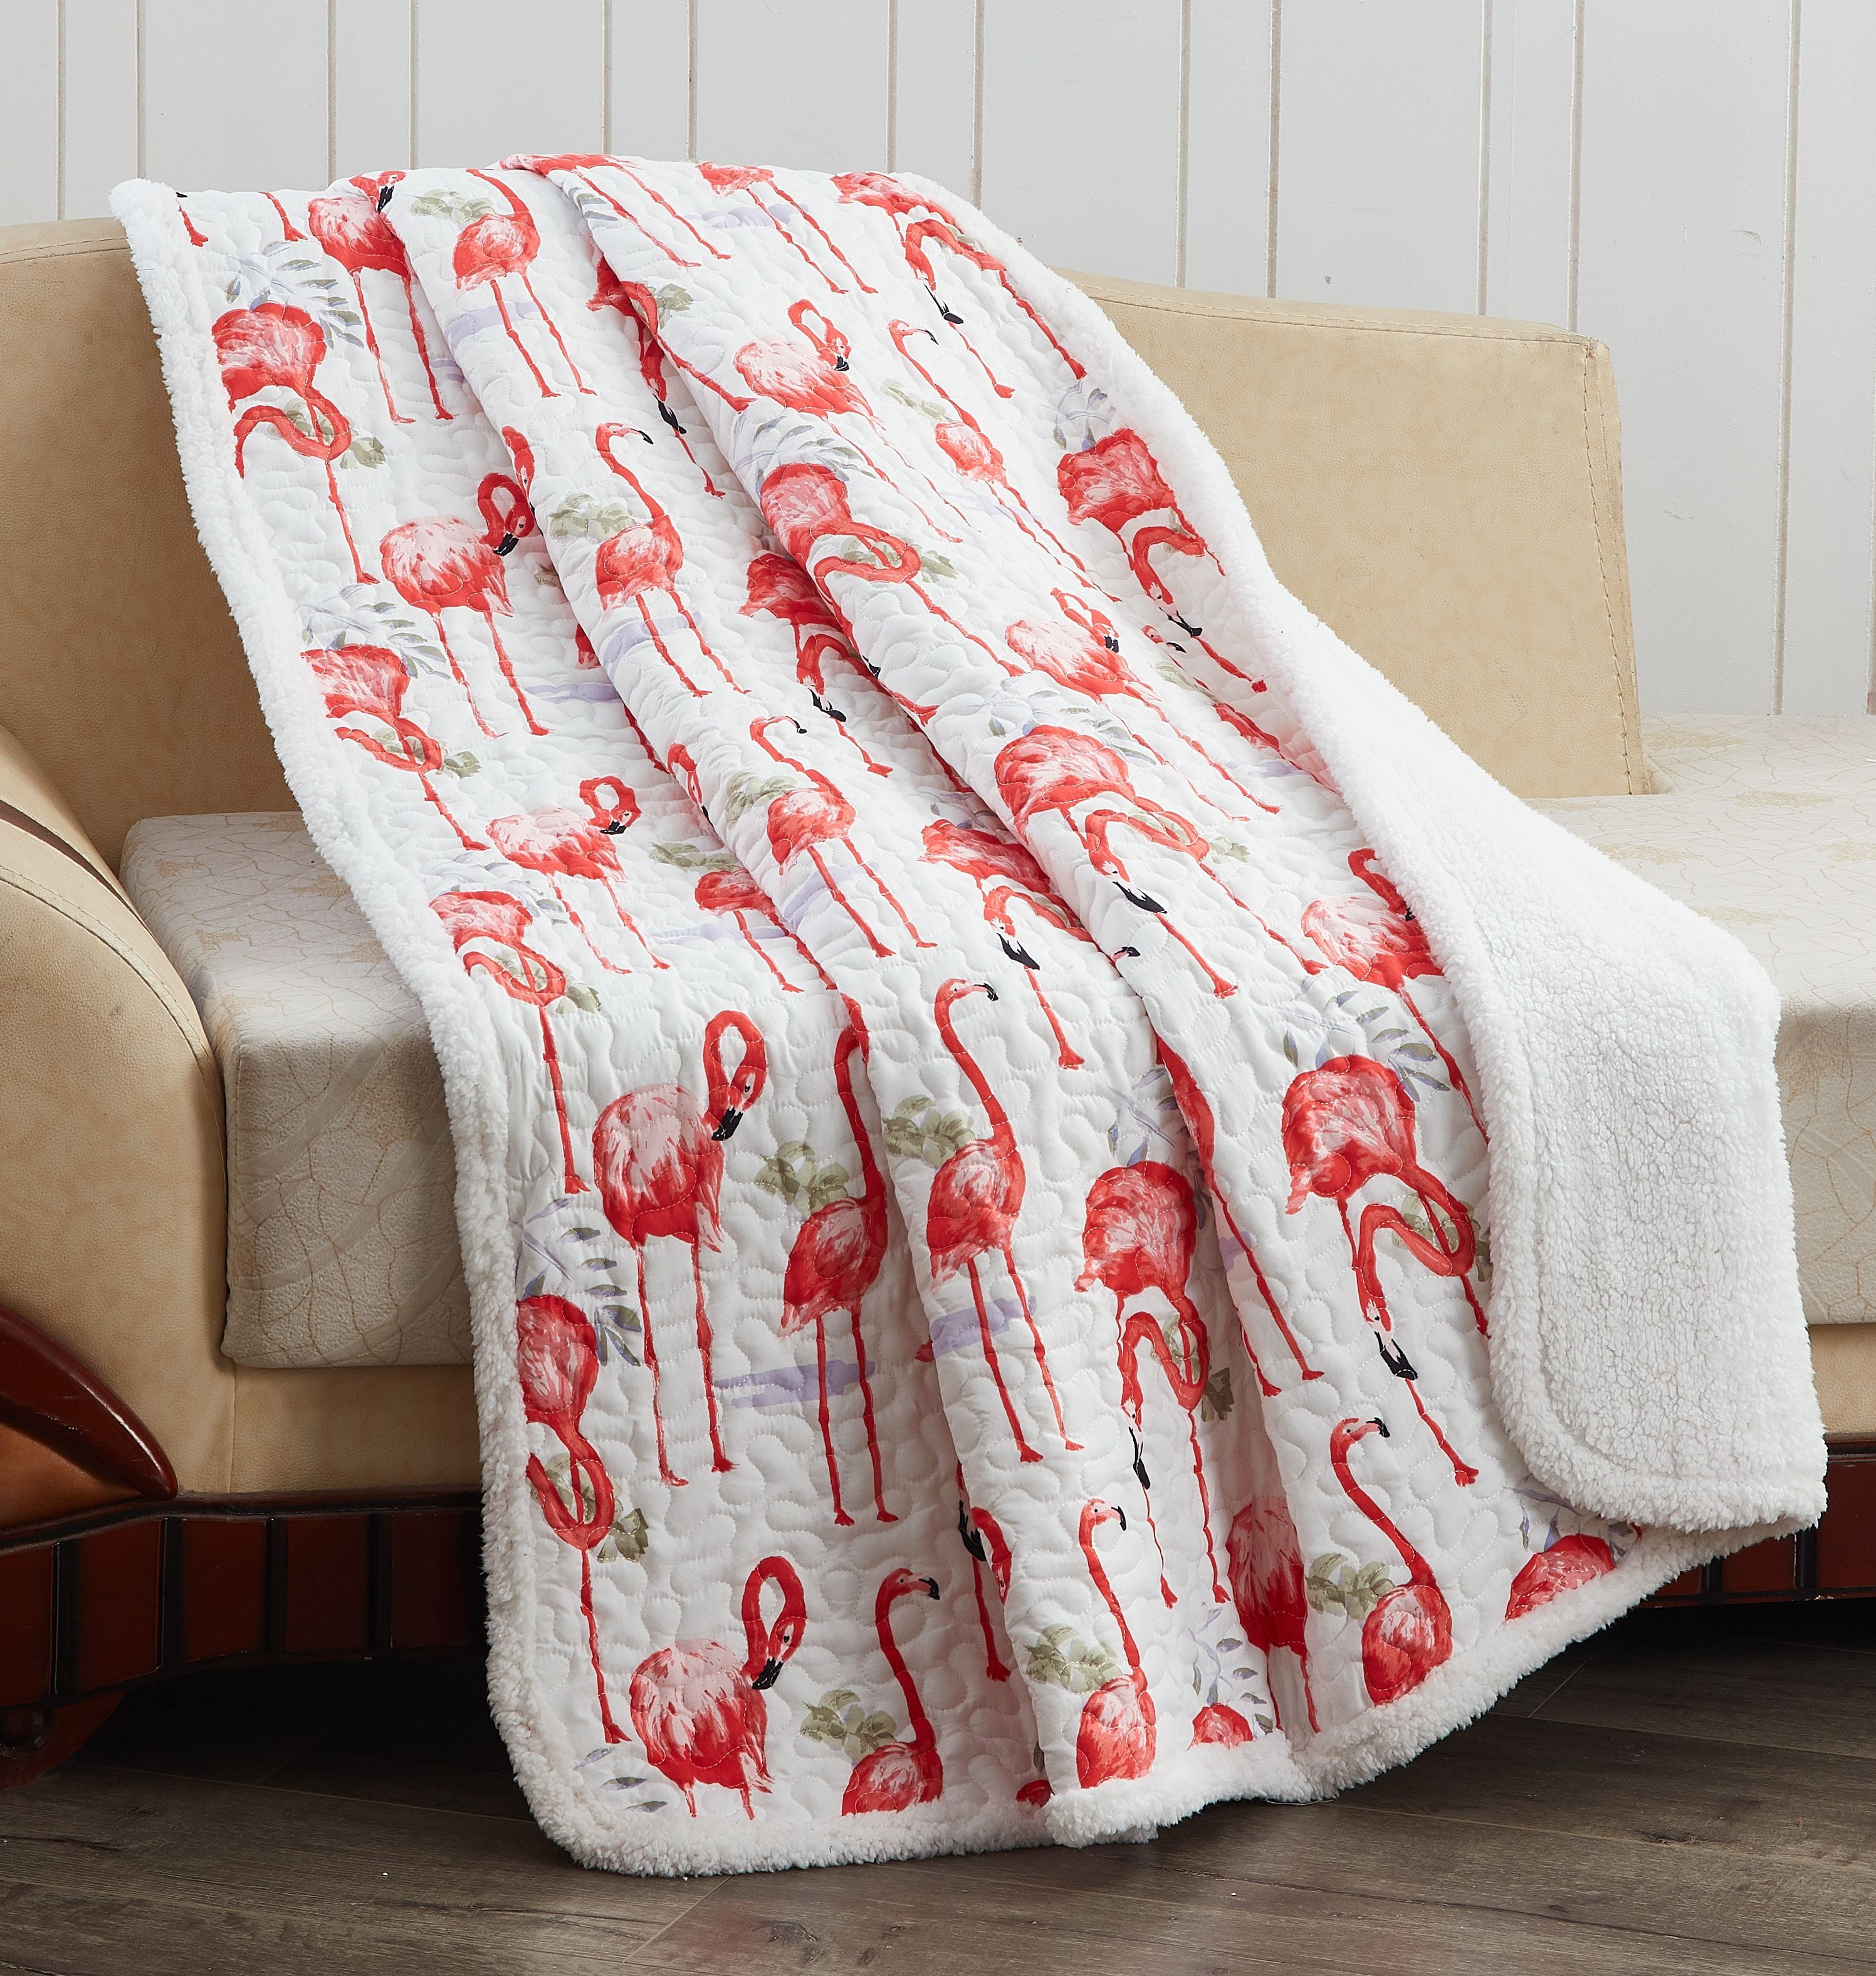 Flamingo 3 Facecloth Winter Warm Blanket Skin-Friendly Anti-Wrinkle Blanket Lightweight Suitable for Sofa Bed Use 50 in X 40 in Anti-Allergy Soft Blanket